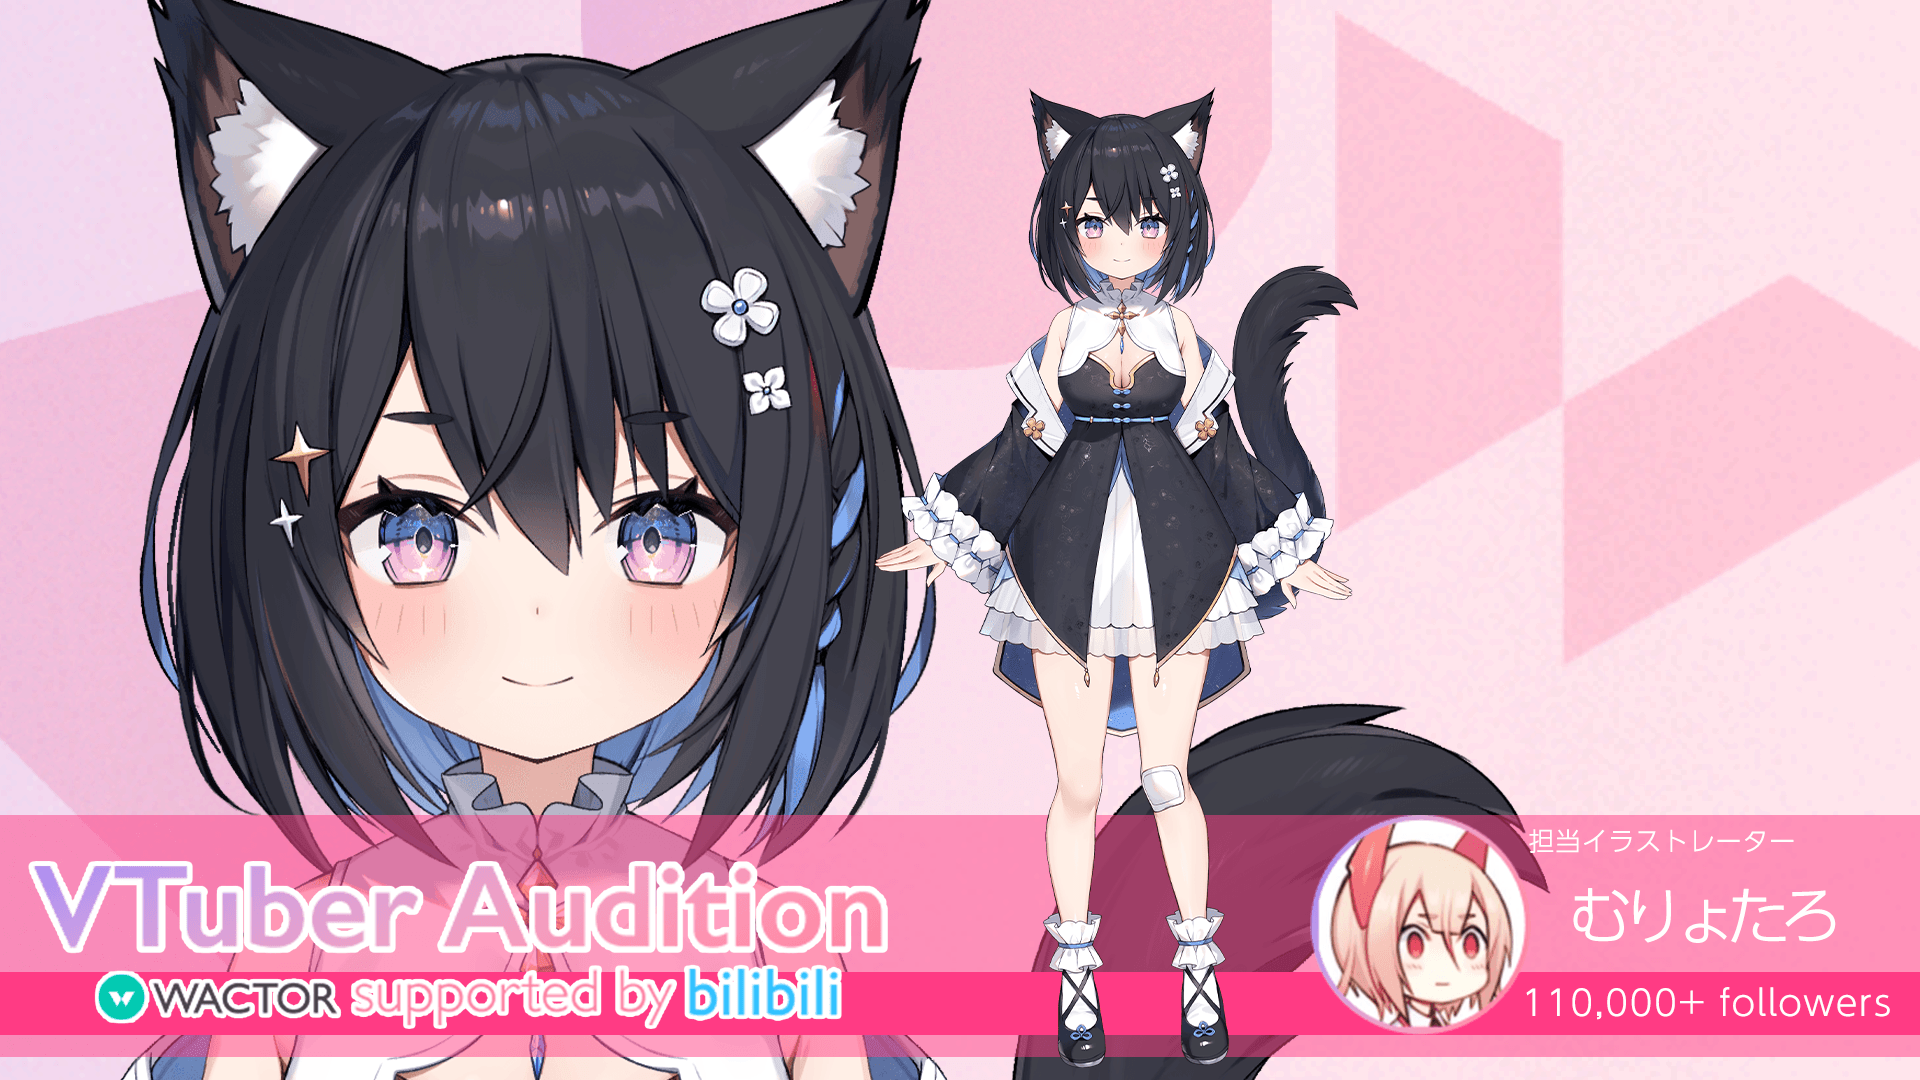 wactor-vtuber-audition-supported-by-bilibili-5